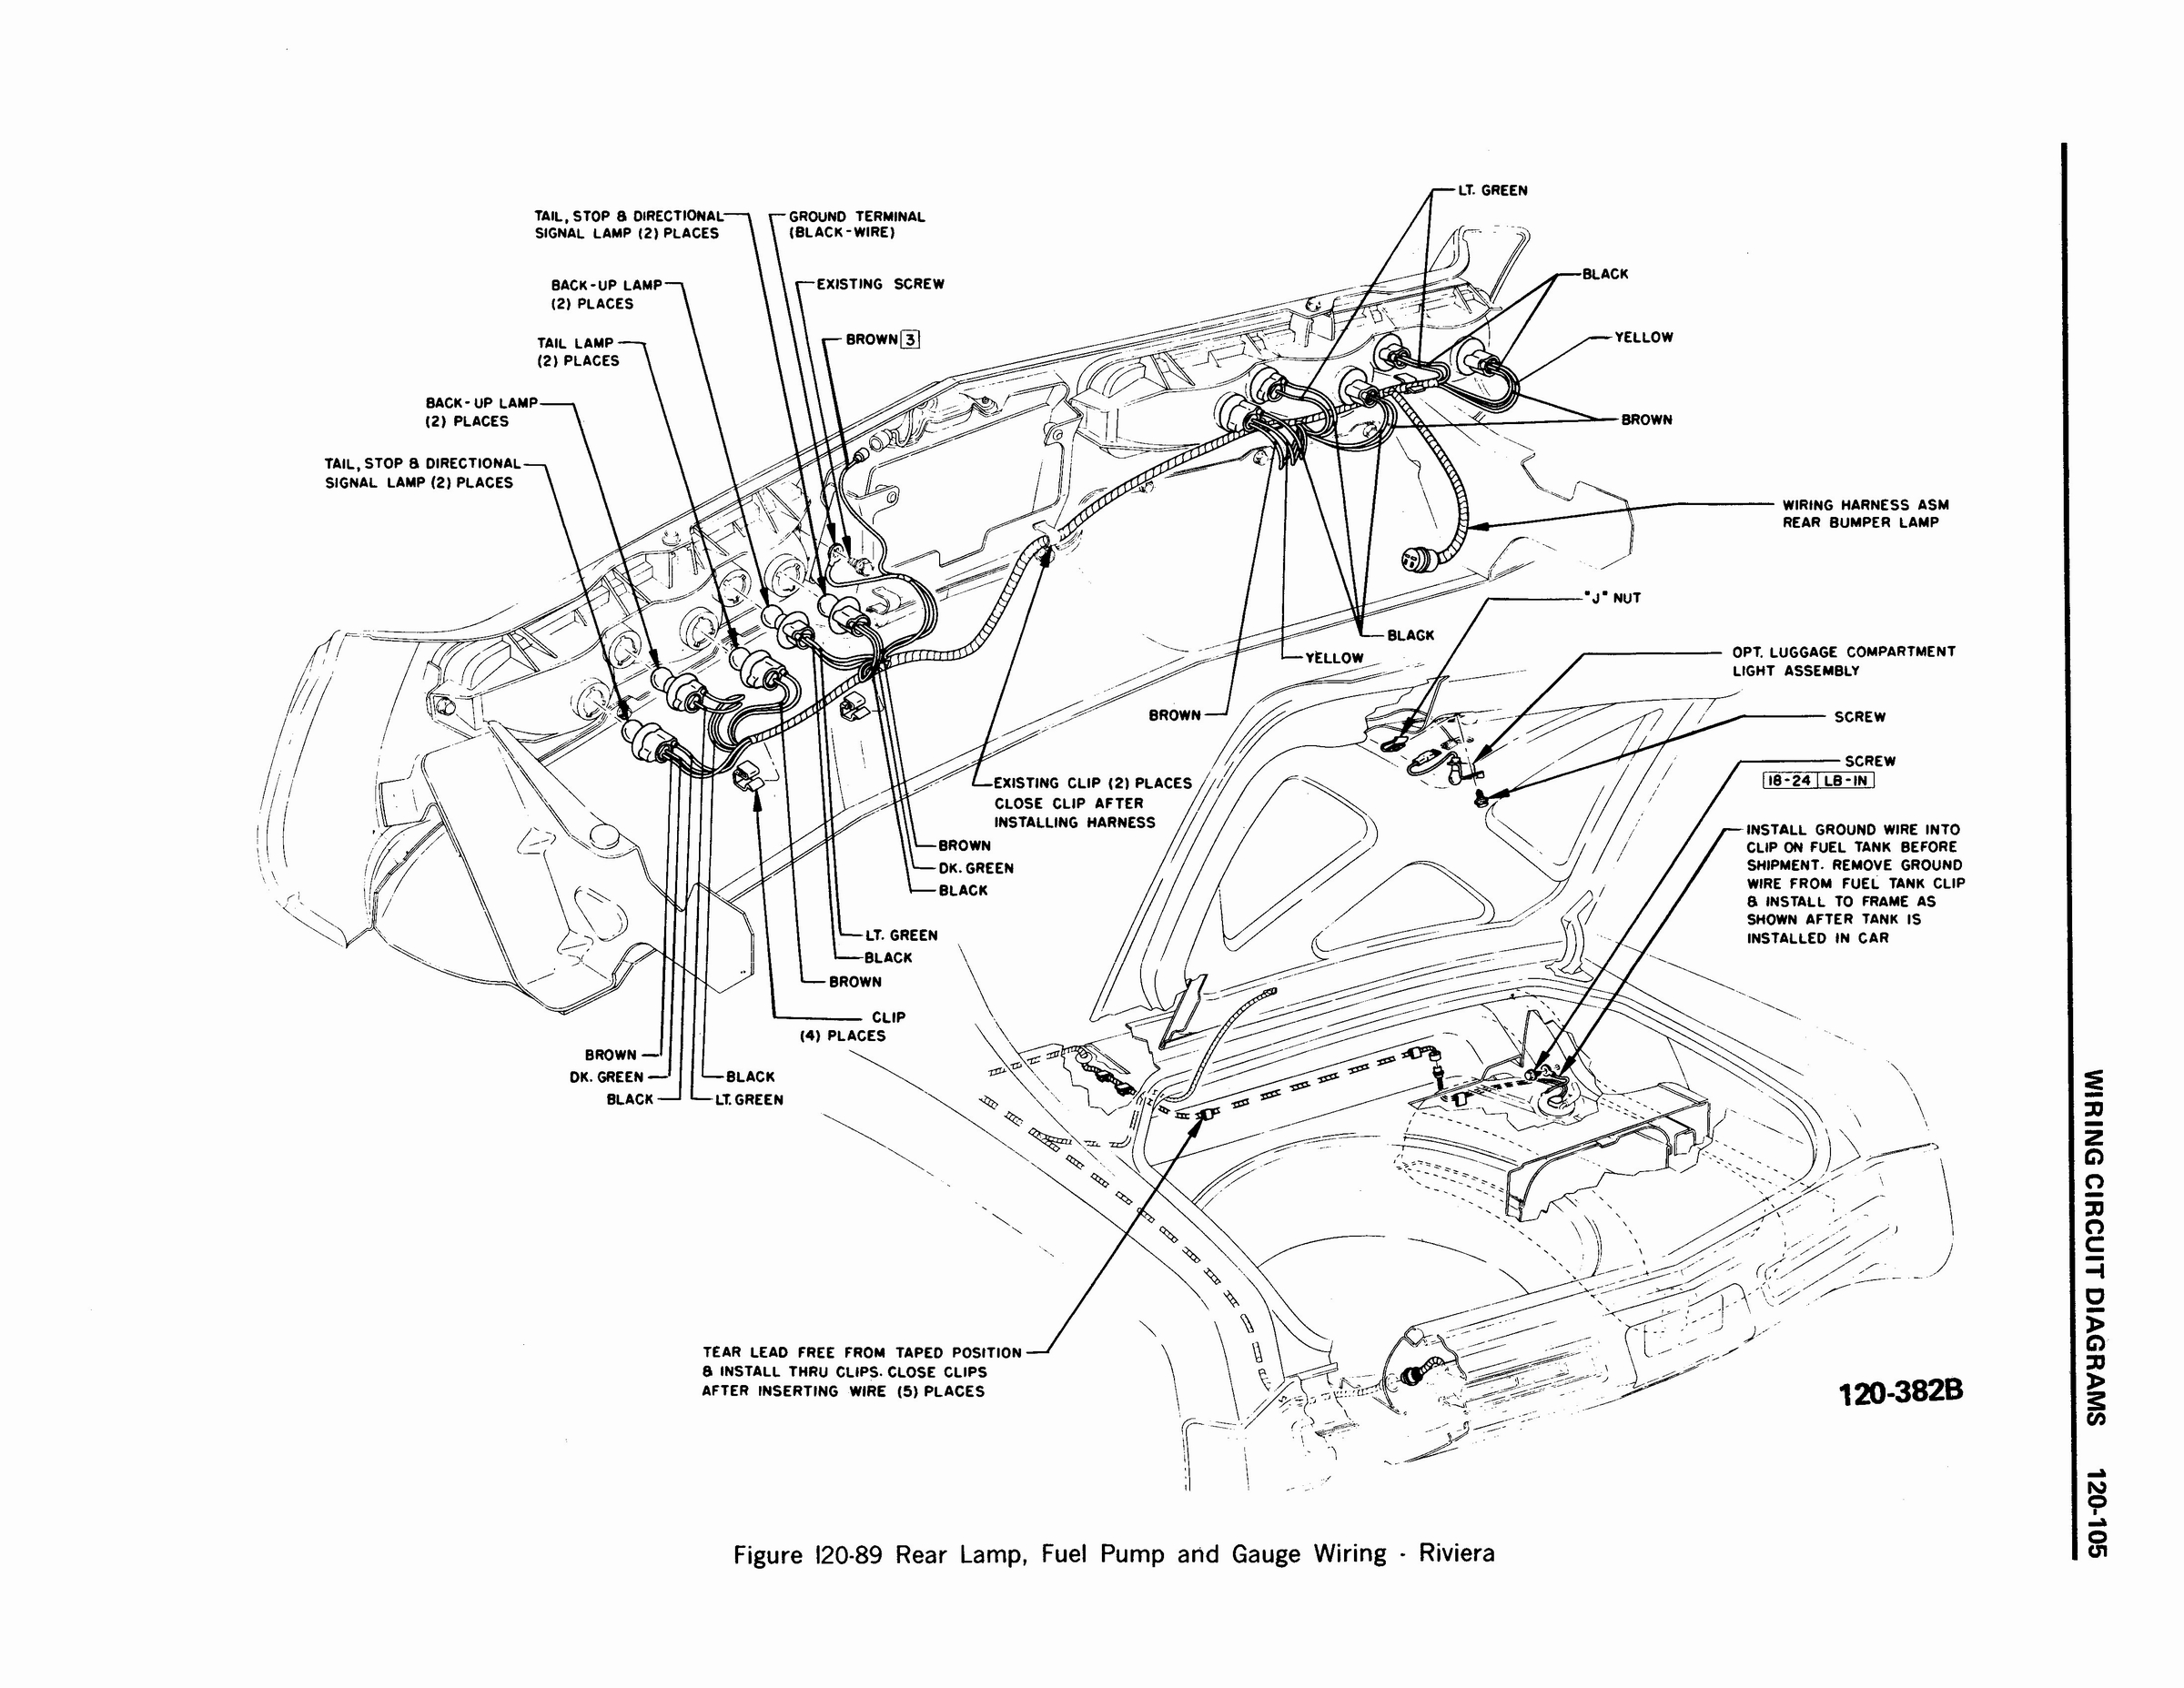 1970 Buick Shop Manual - Chassis Electrical Page 106 of 141